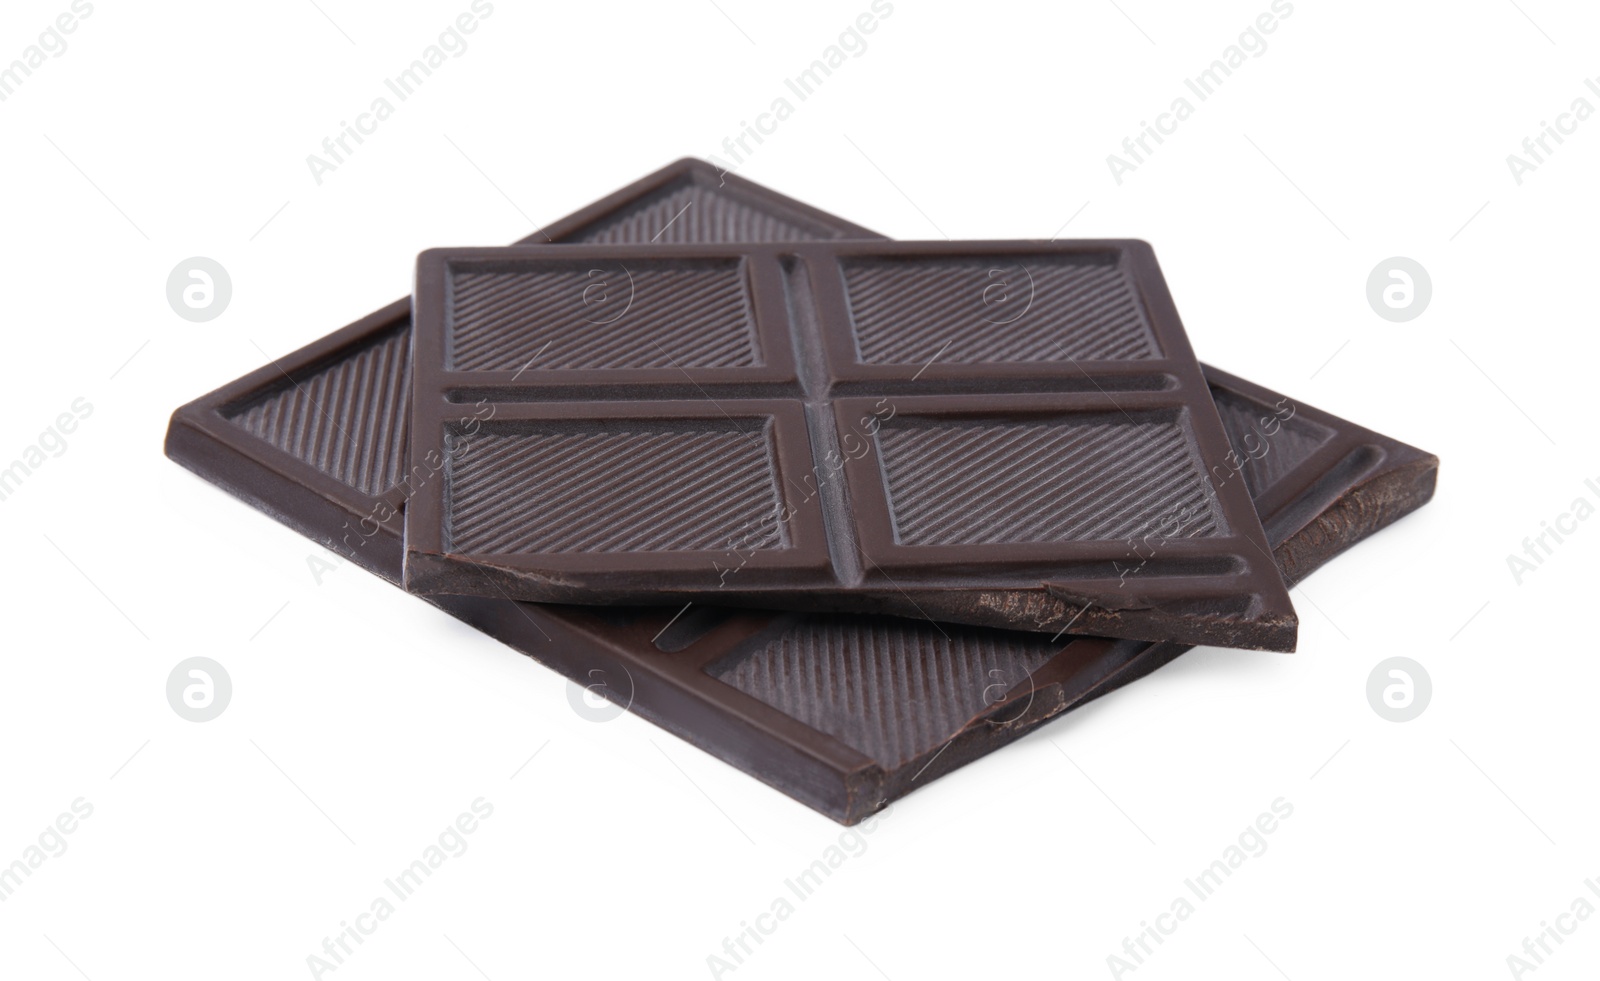 Photo of Pieces of tasty dark chocolate bar on isolated white